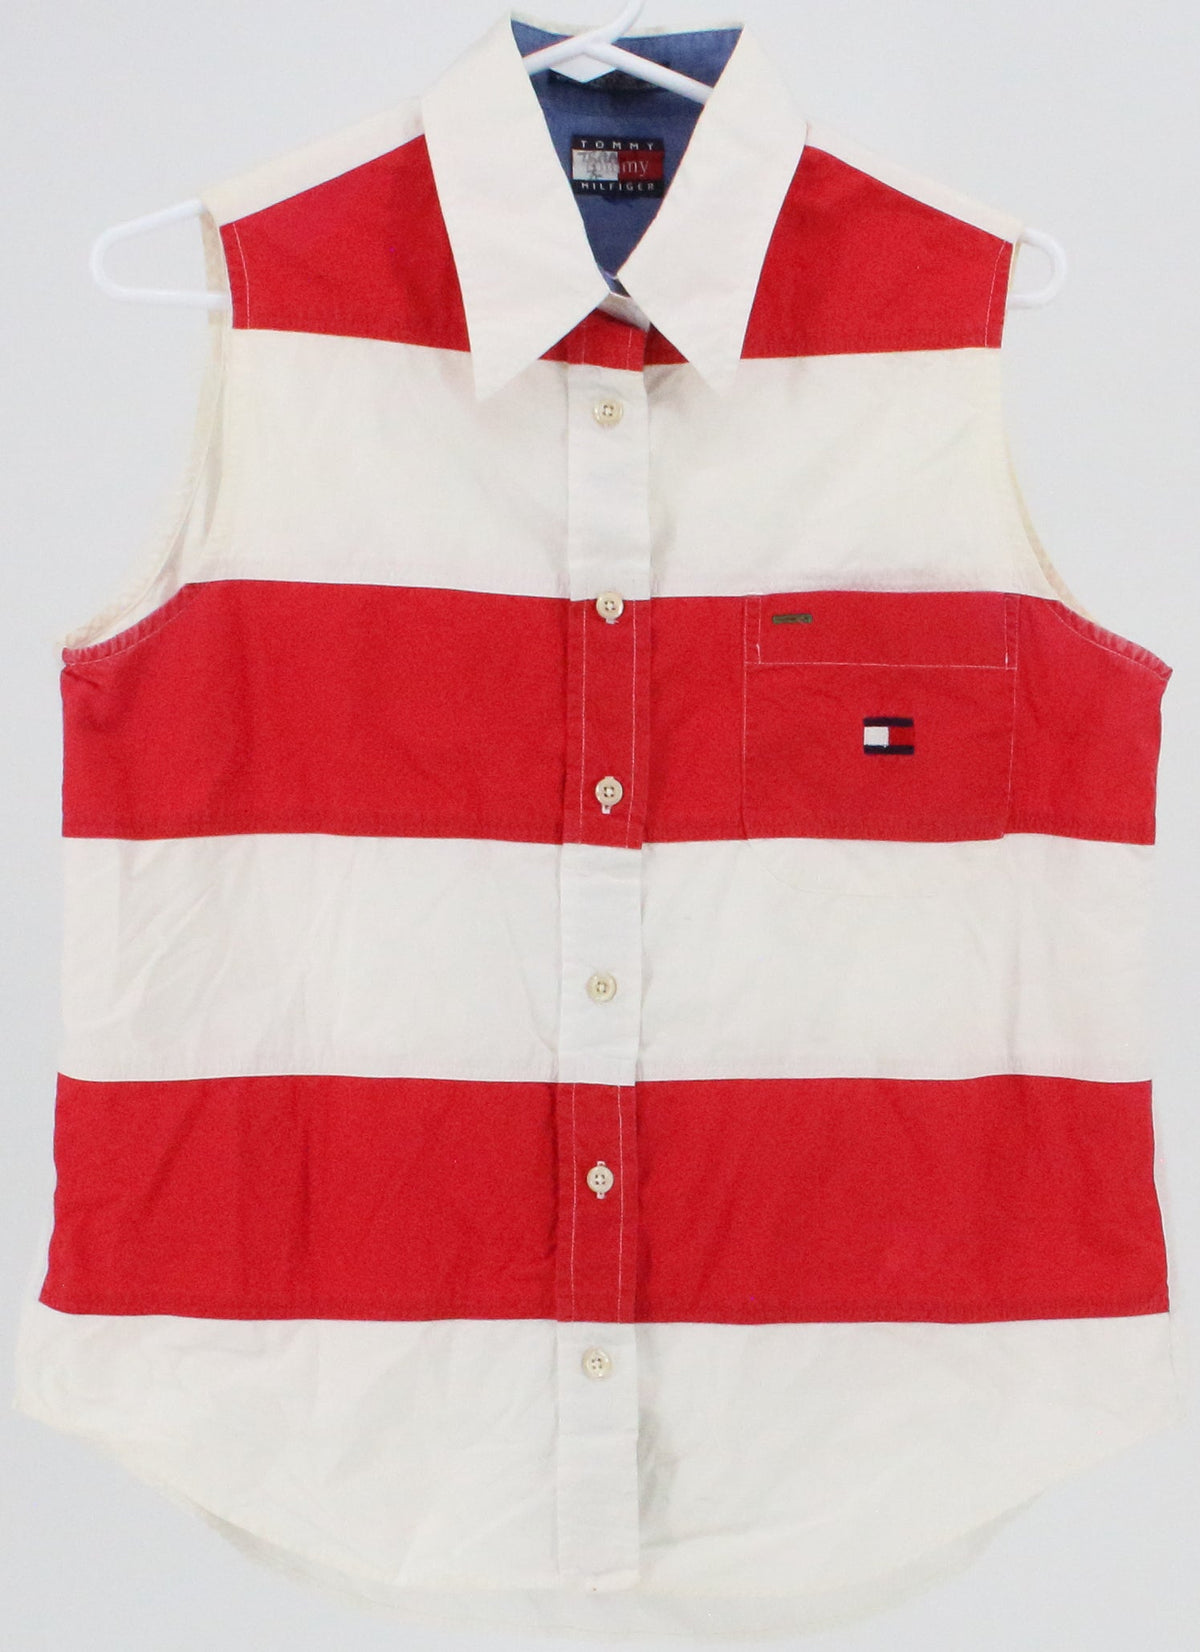 Tommy Hilfiger White and Red Striped Sleeveless Blouse